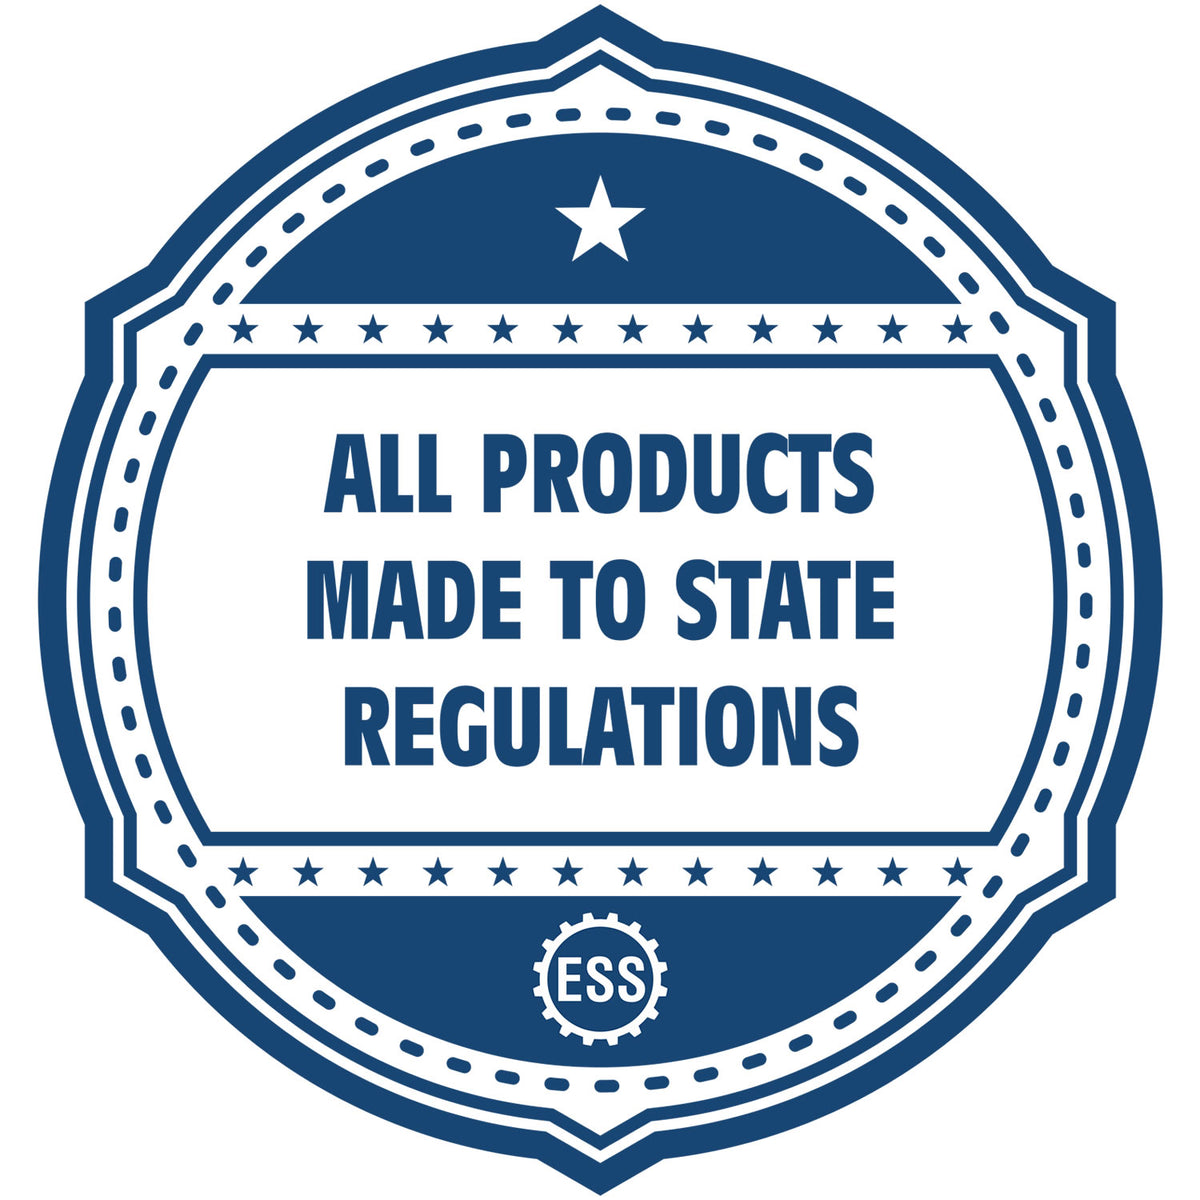 A blue icon or badge for the Hybrid Texas Landscape Architect Seal showing that this product is made in compliance with state regulations.